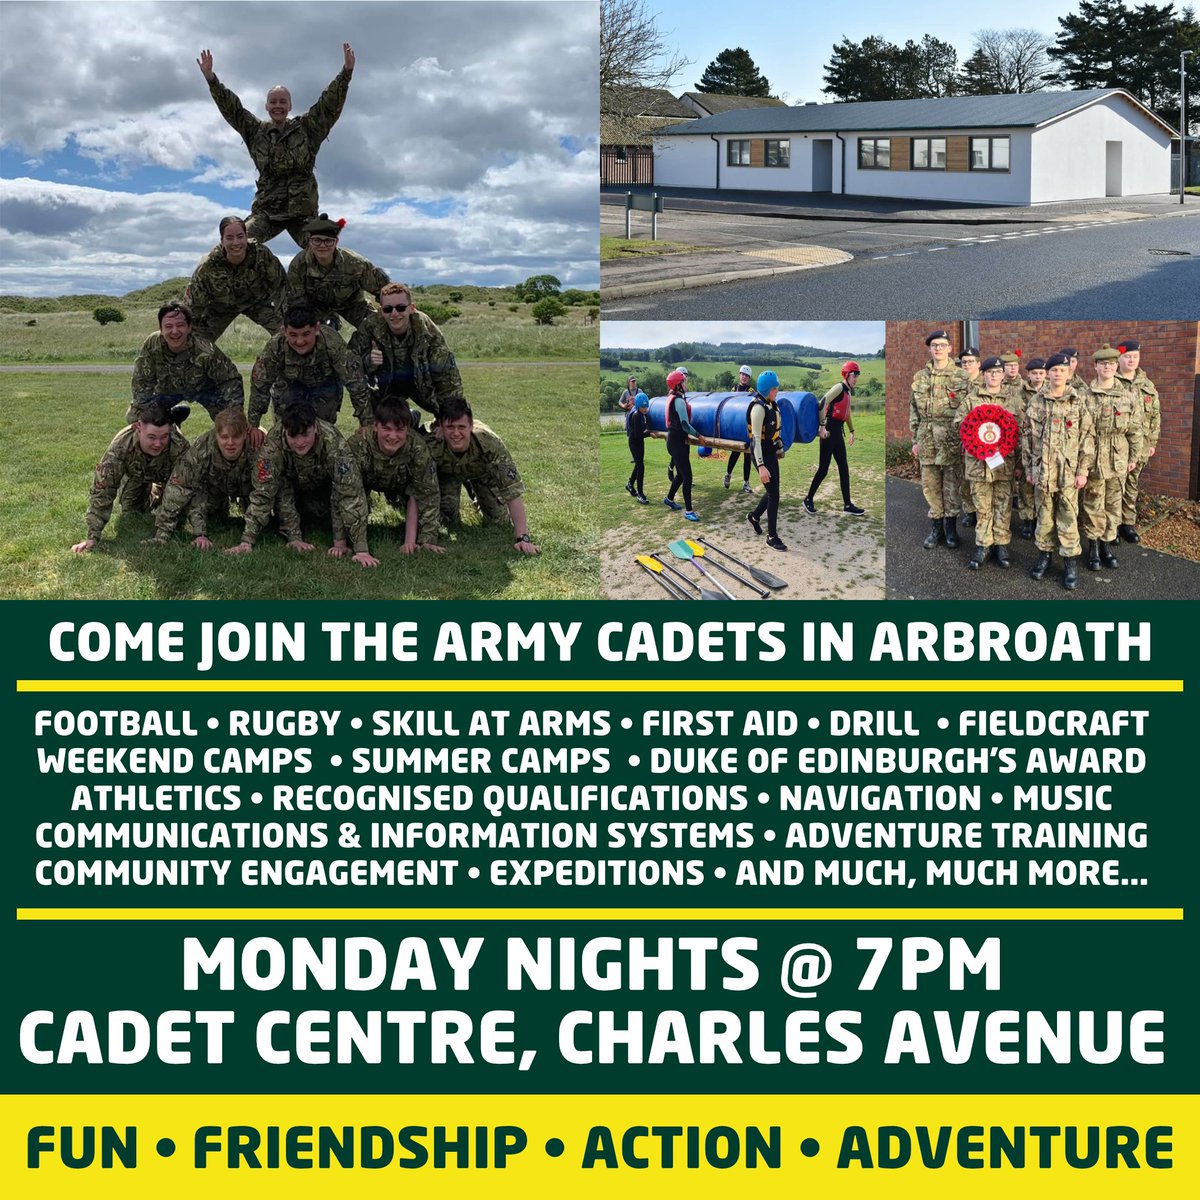 The #ArmyCadets in #Arbroath are now recruiting. Anyone from @ArbroathHigh or @ArbroathAcad interested in joining, come along to the Cadet Centre, Charles Avenue on Monday nights from 7pm. @anguscouncil #goingfurther #recruitment #angus